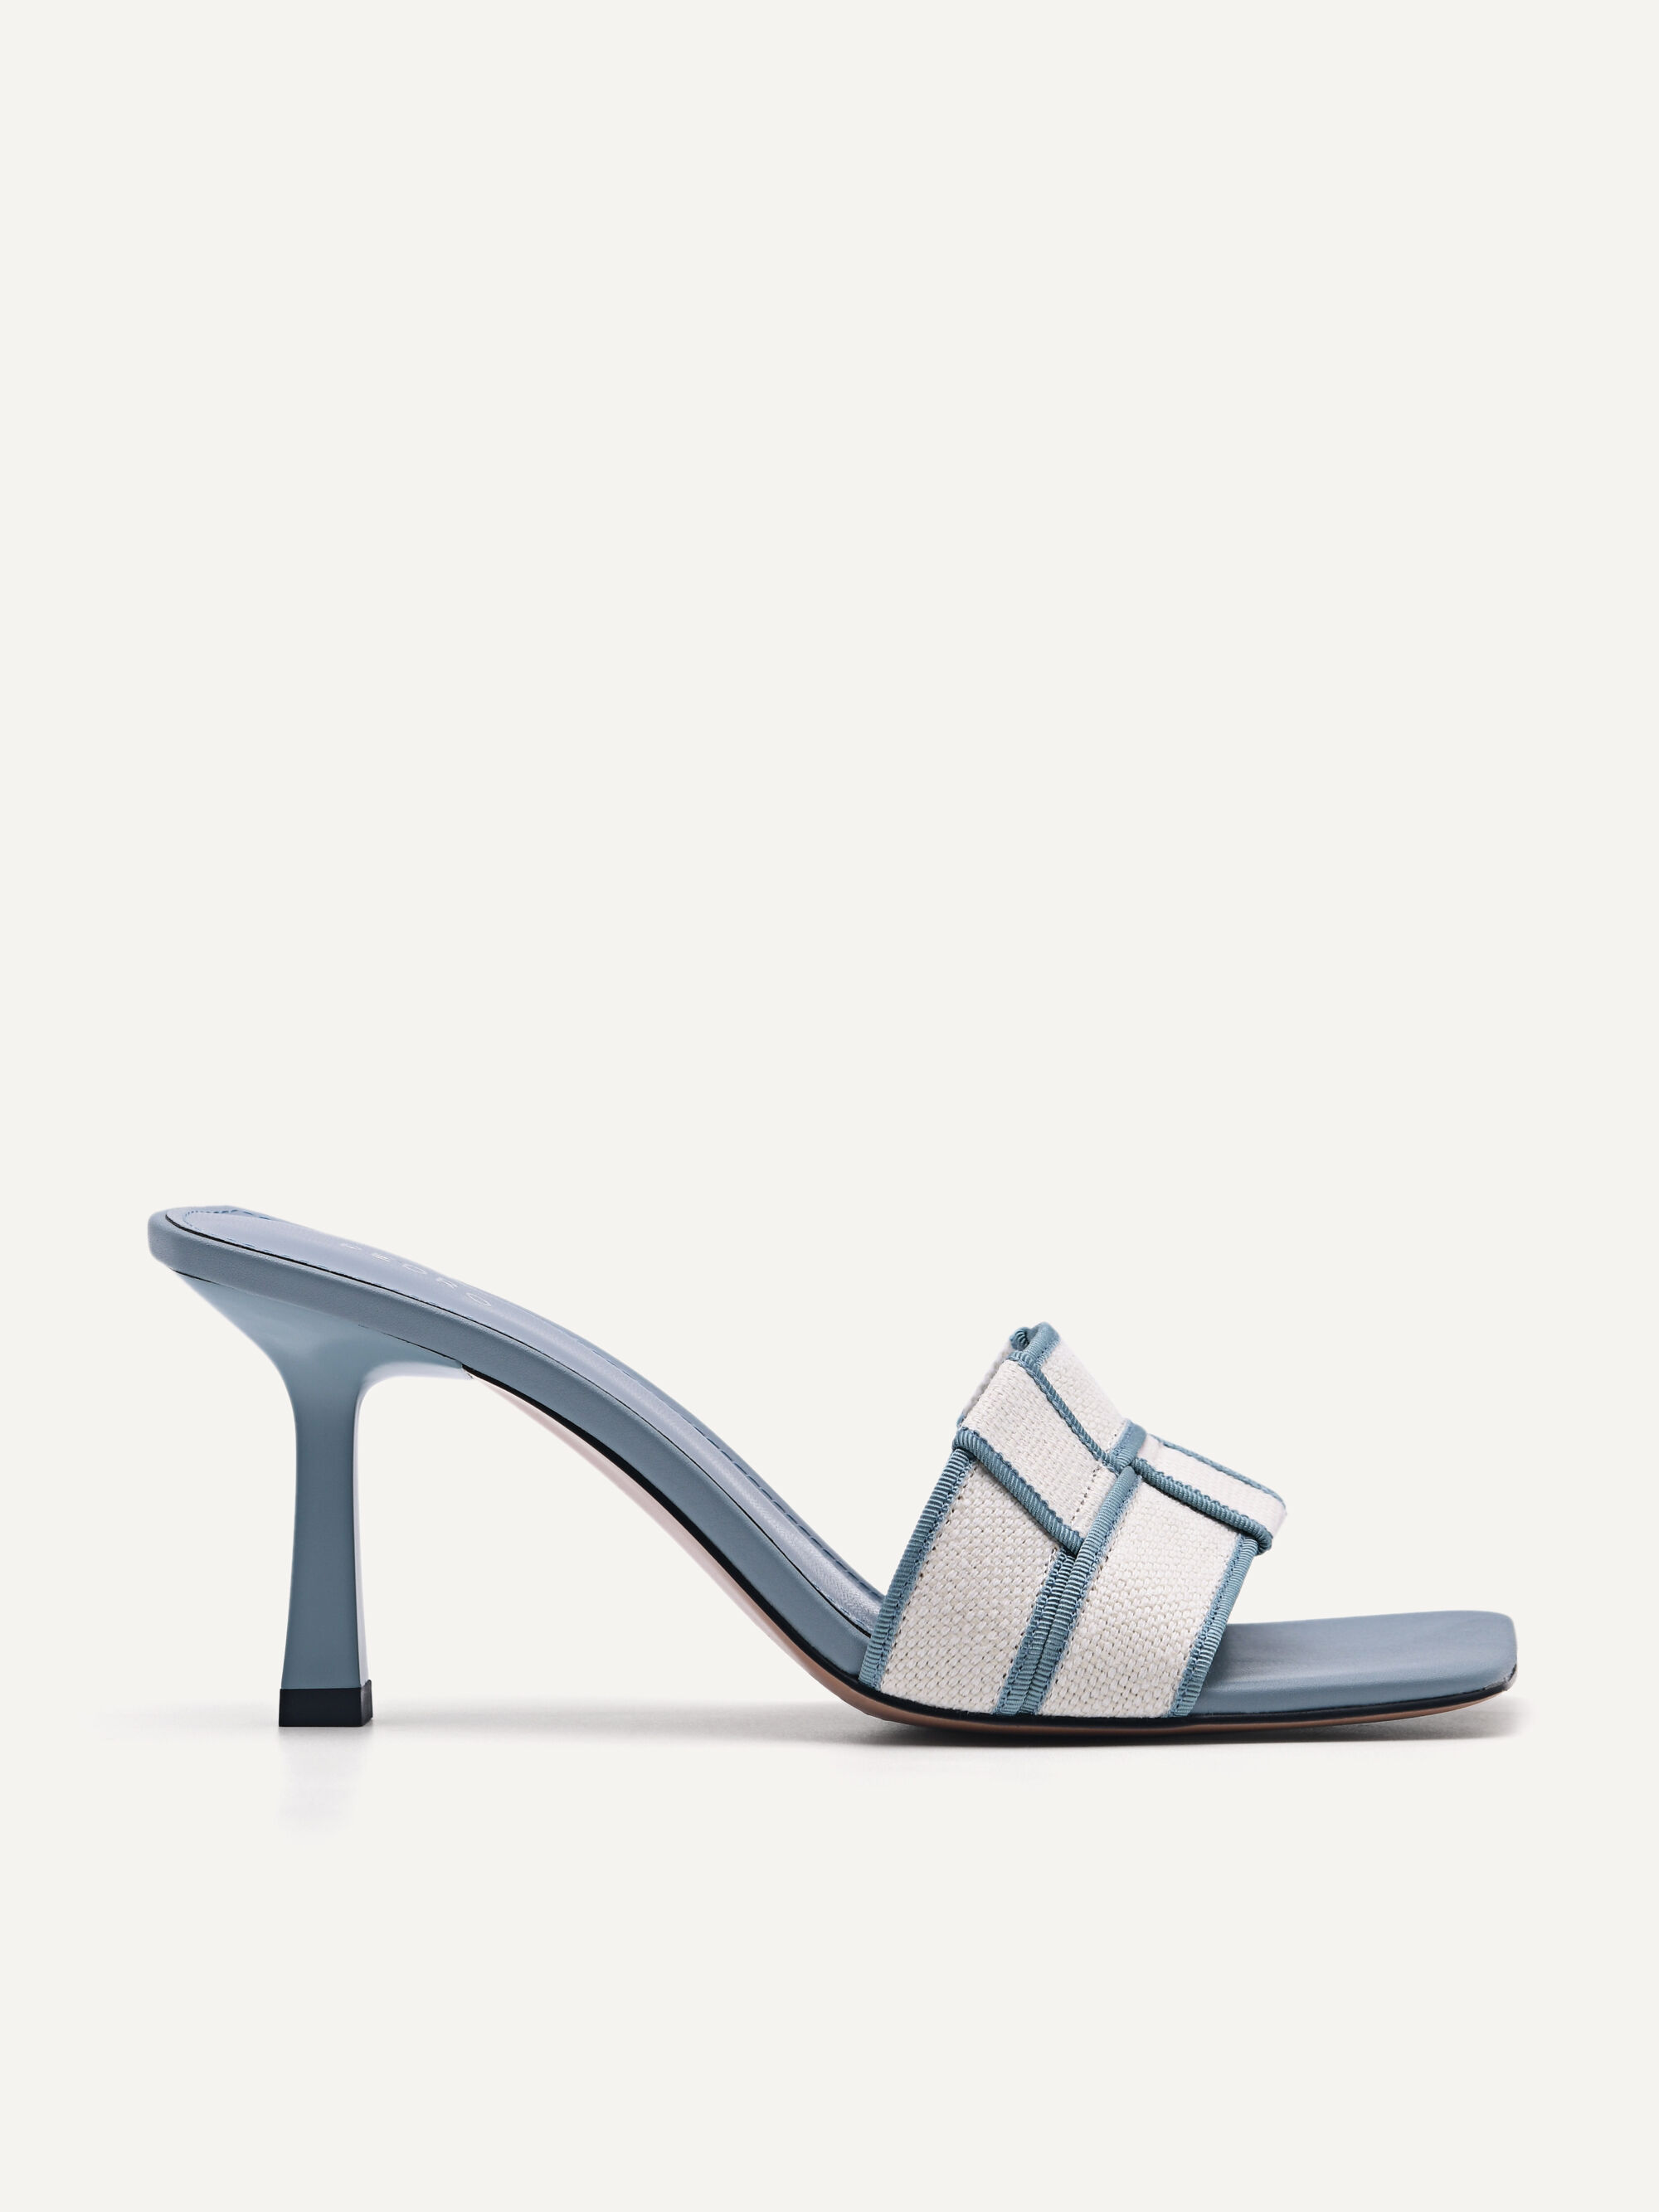 Shoes High-Heeled Sandals Strapped High-Heeled Sandals Esprit Strapped High-Heeled Sandals blue casual look 